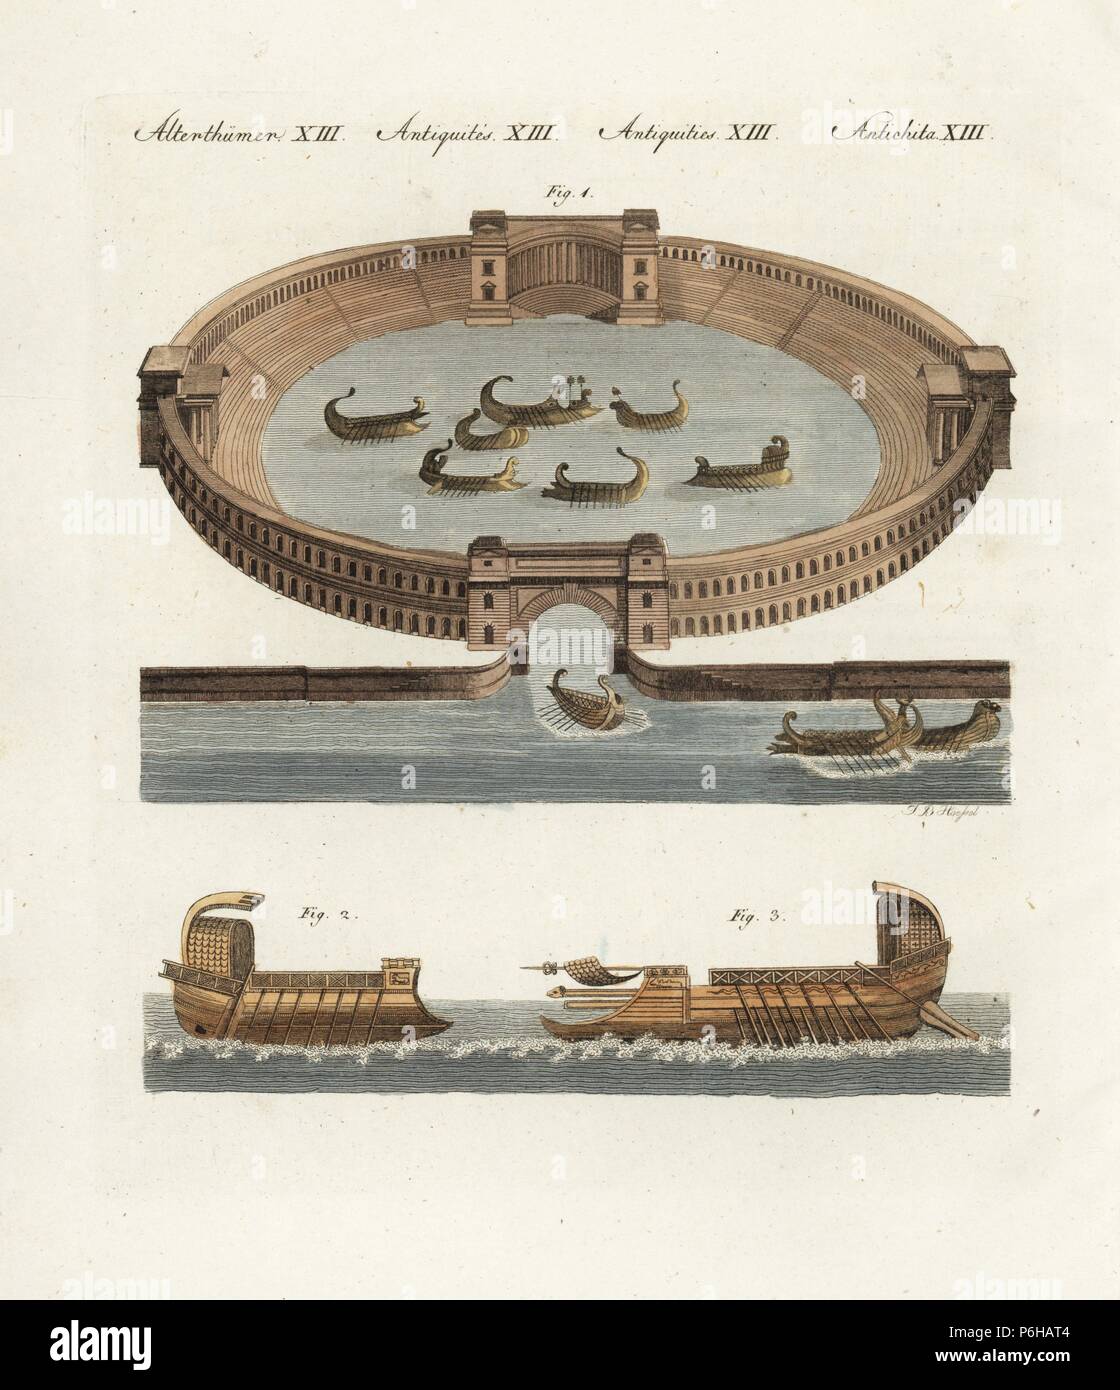 Ancient Roman naumachia with reenactment of famous sea battle in an ampitheatre between naval fleets of condemned prisoners 1. Galley with single row of oars 2, and bireme warship with two rows of oars 3. Handcoloured copperplate engraving by J.B. Hoessel from Friedrich Johann Bertuch's Bilderbuch fur Kinder (Picture Book for Children), Weimar, 1802. Stock Photo